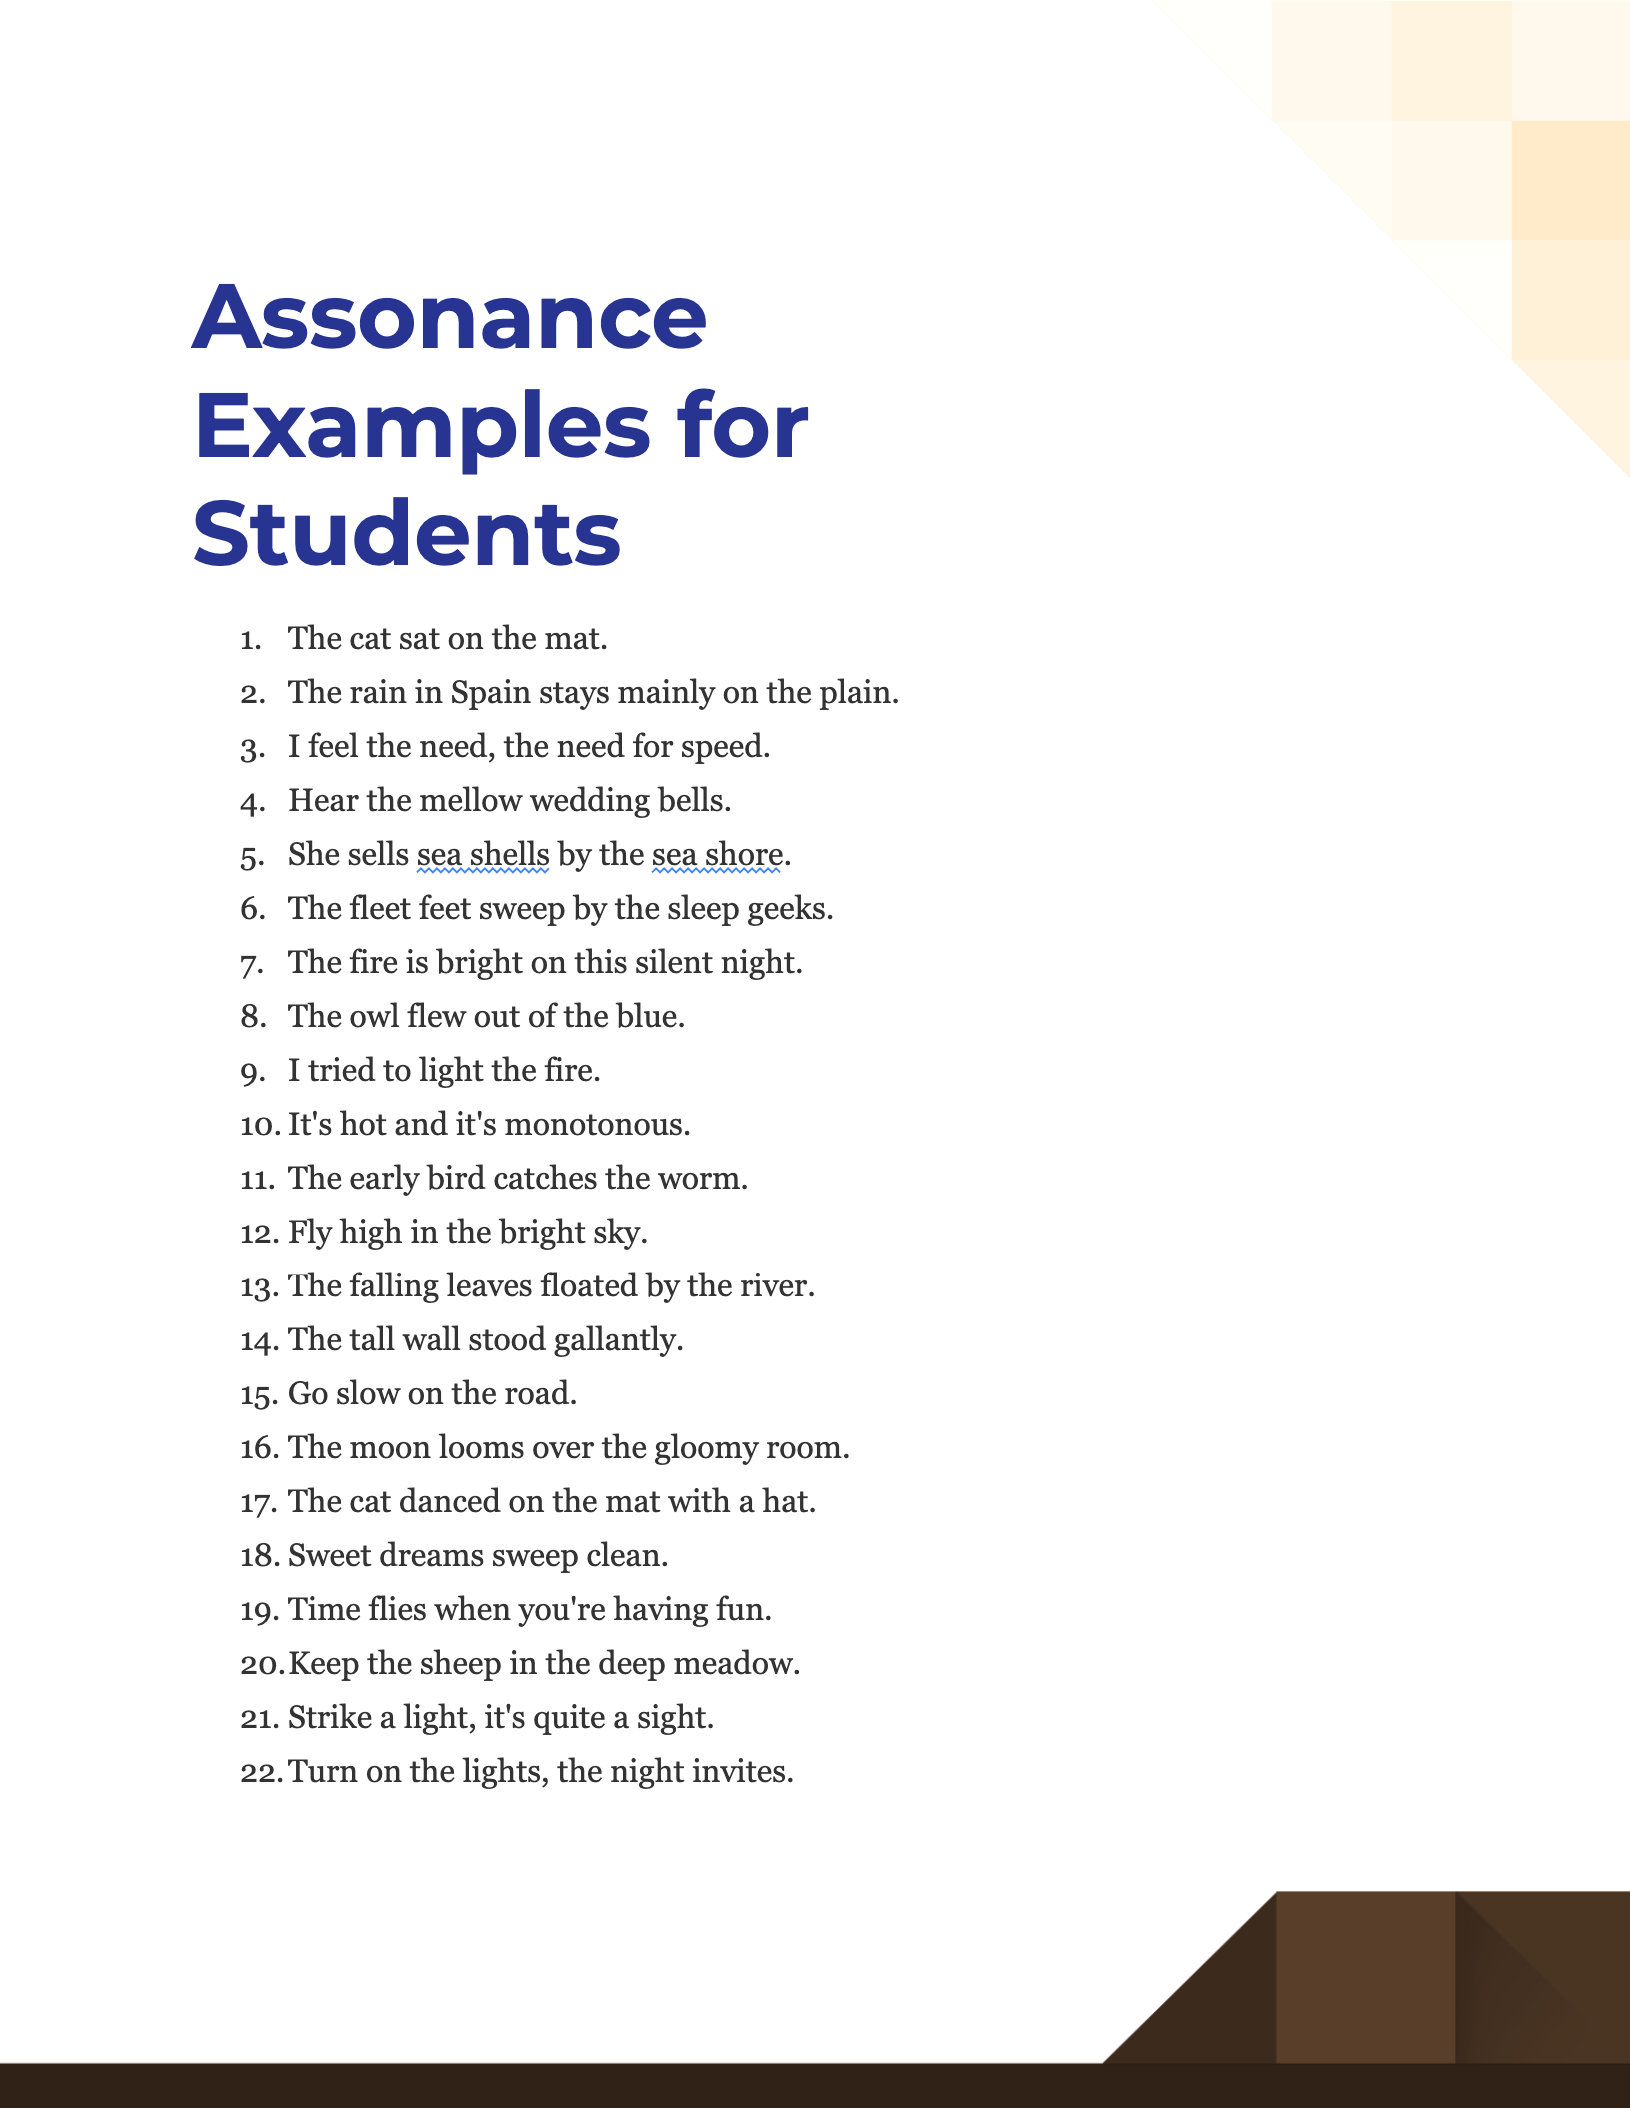 Assonance Examples for Students